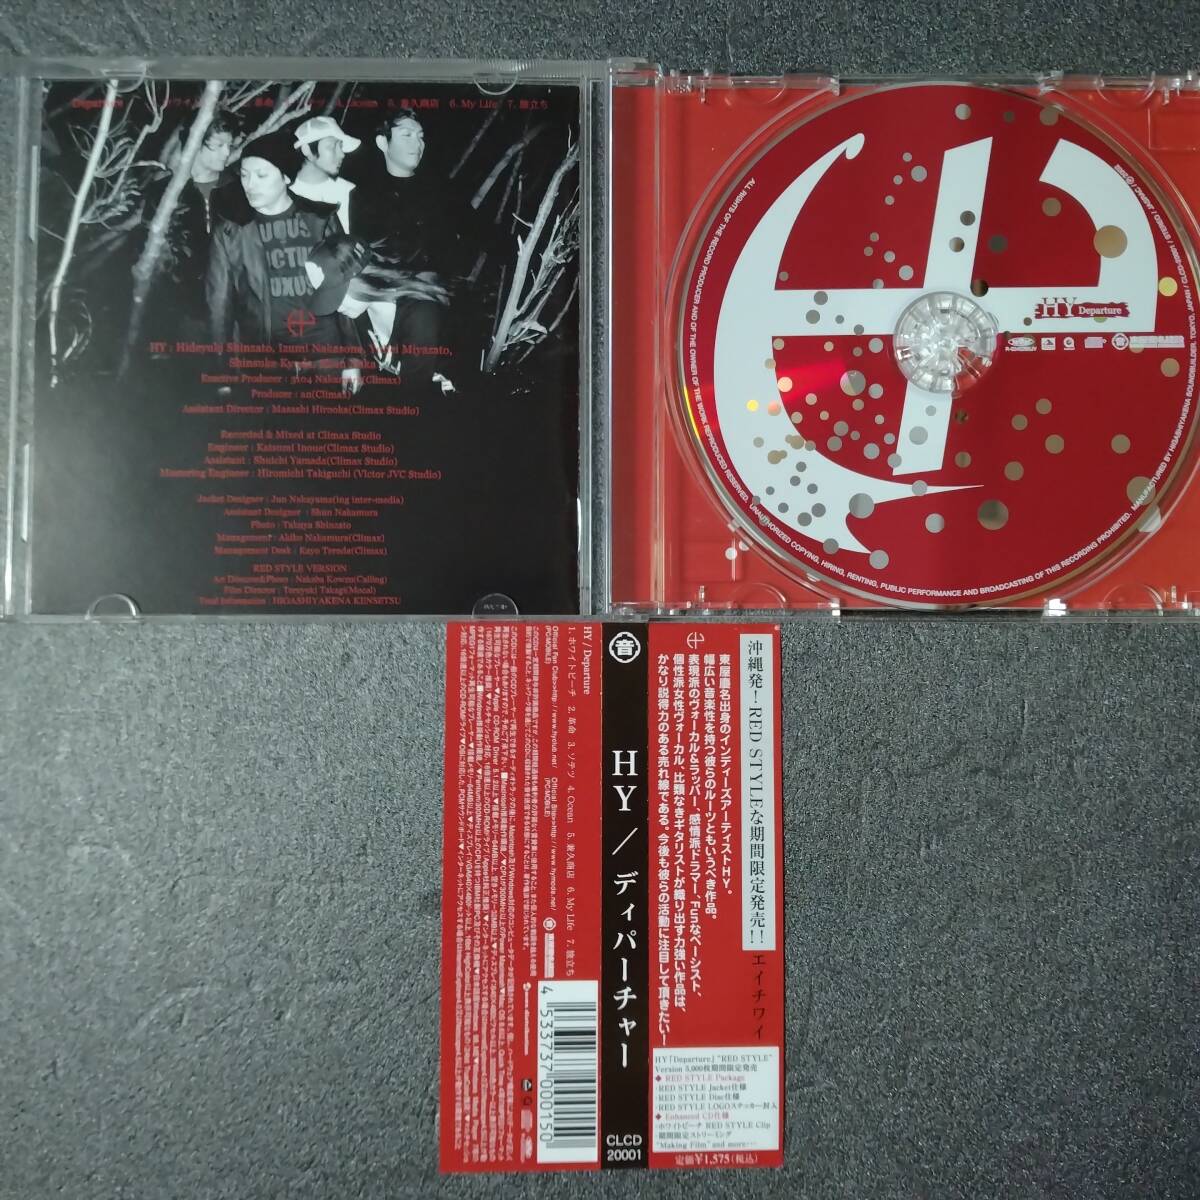 ◎◎ HY「Departure」 同梱可 CD ミニアルバム、“RED STYLE” Package [限定盤]_画像3